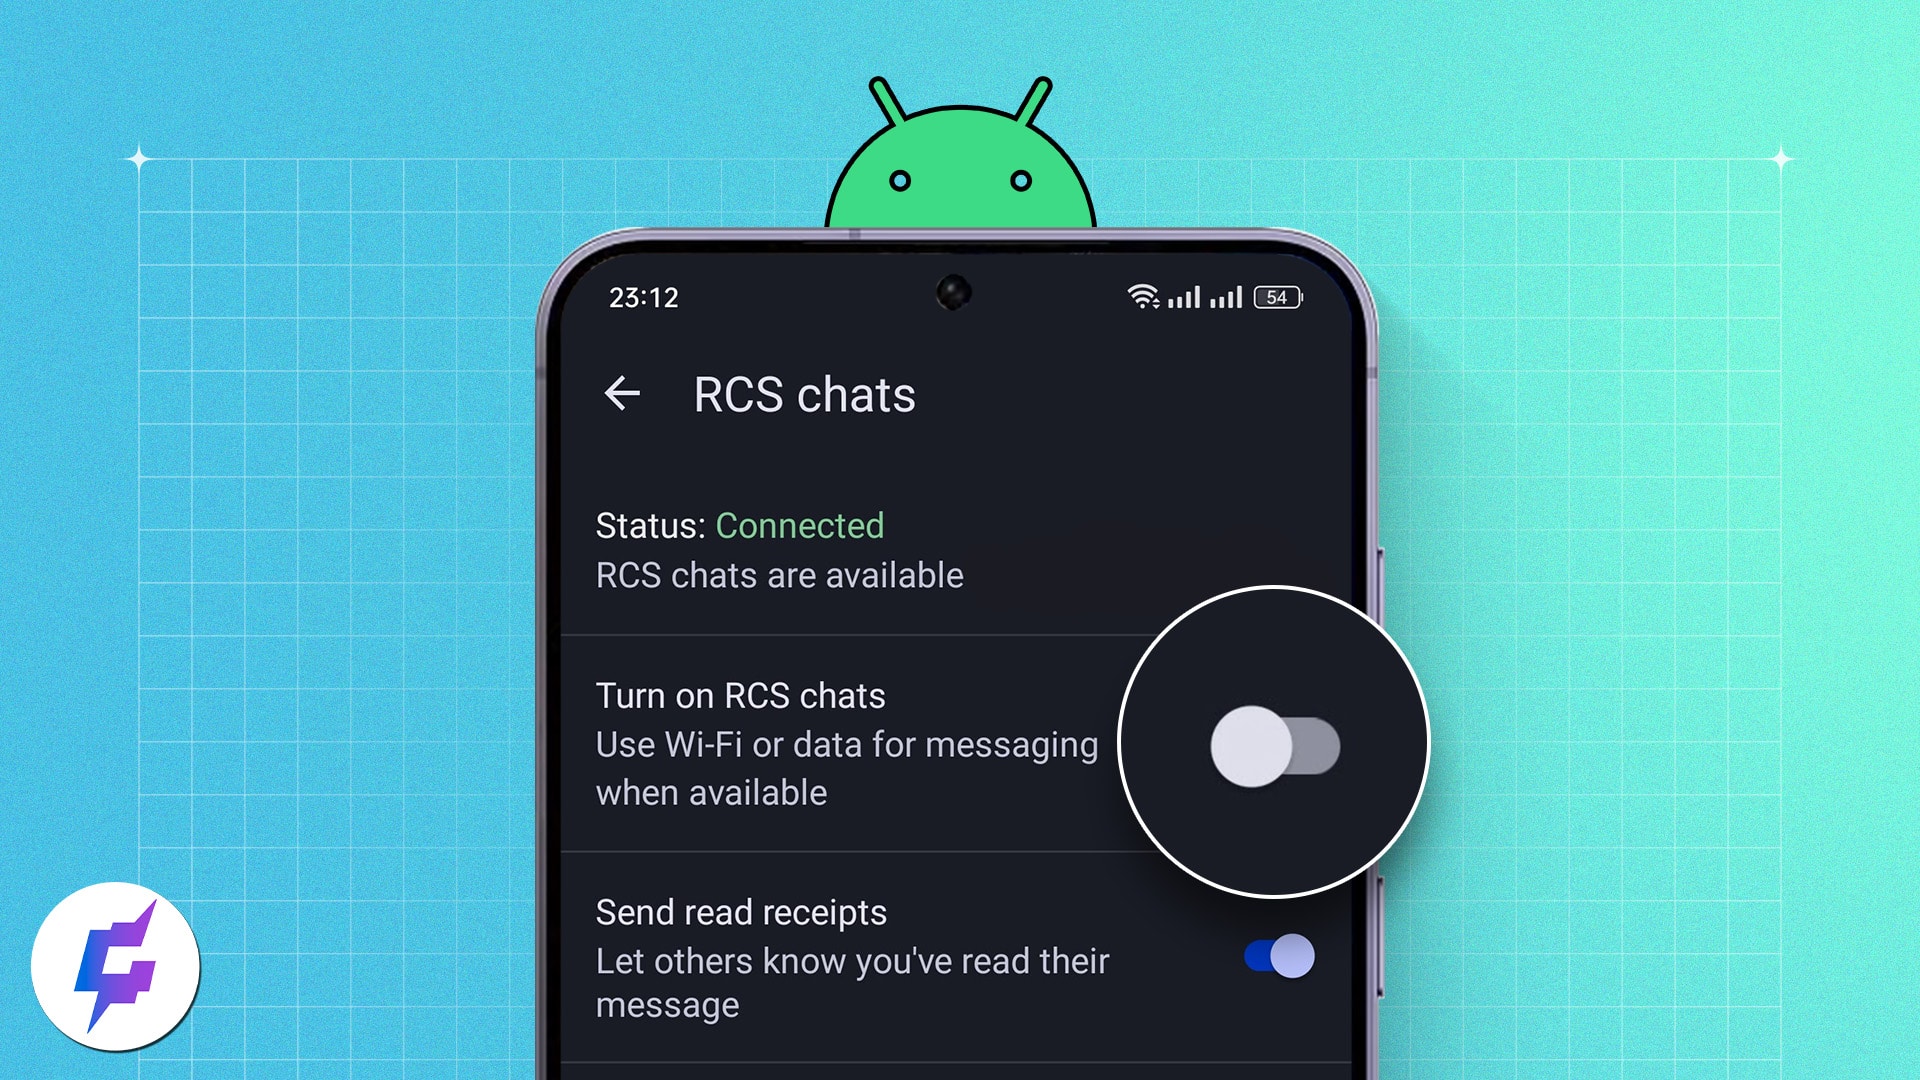 How to turn off RCS on Android